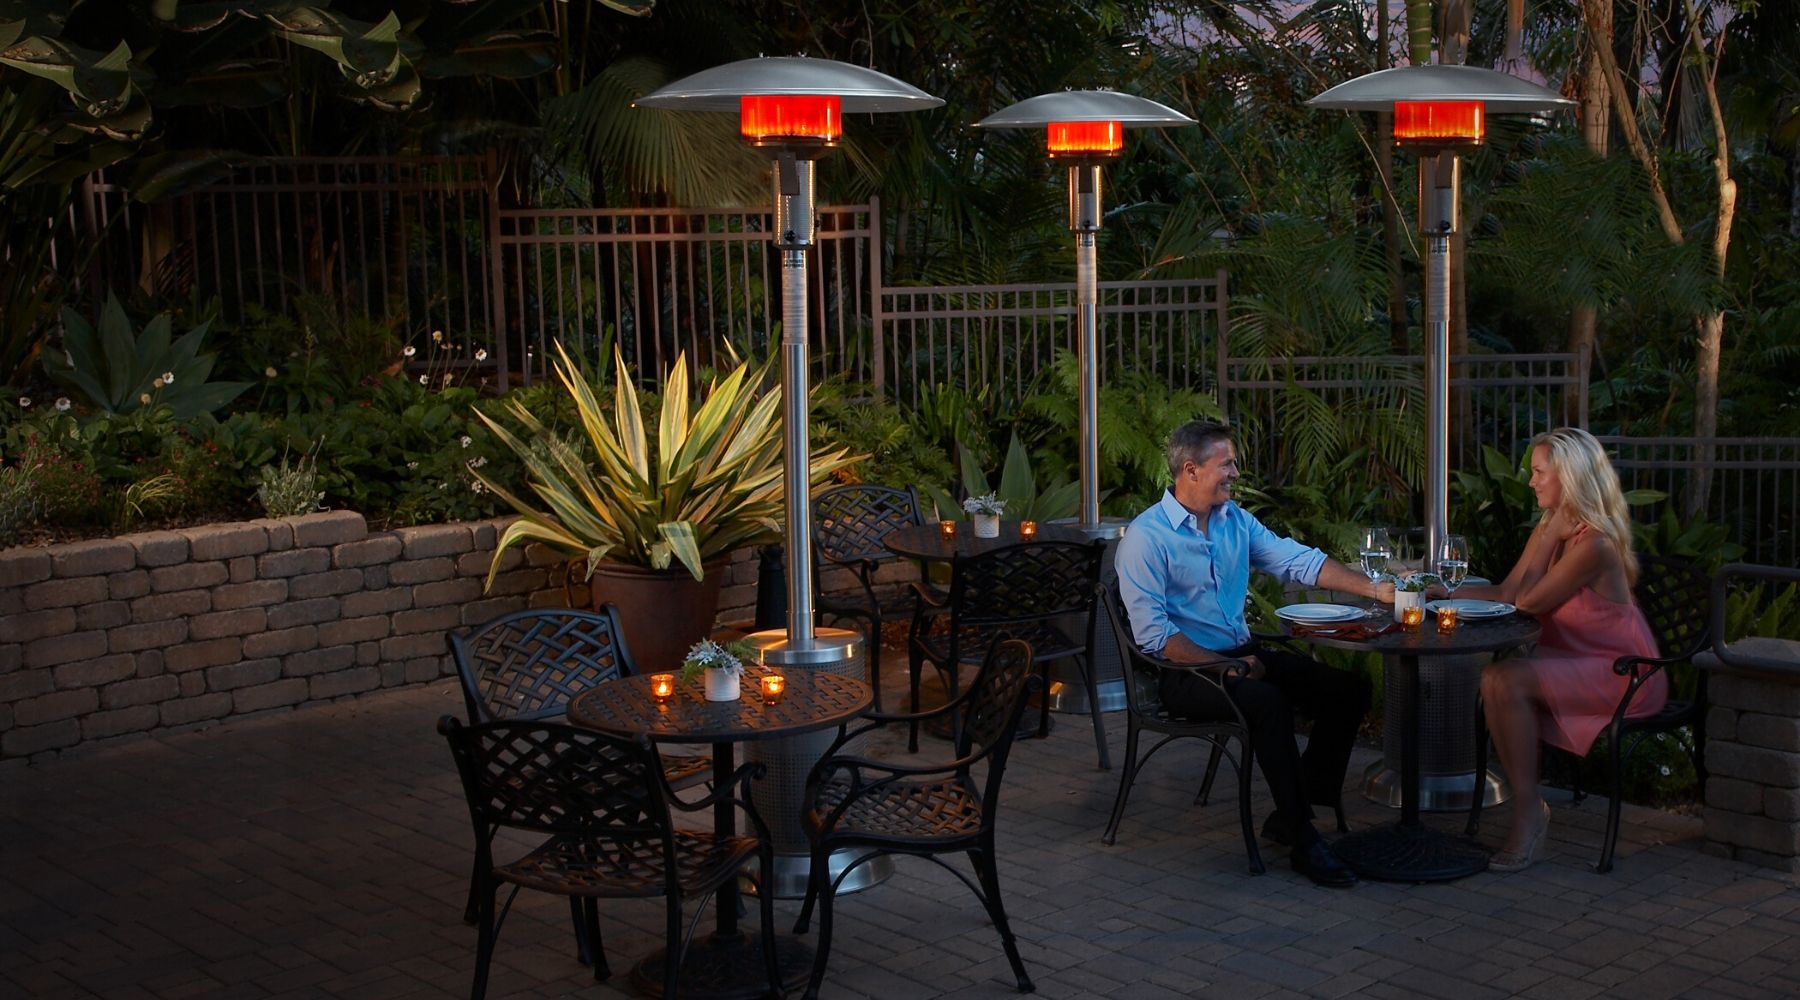 Free Standing Patio Heaters